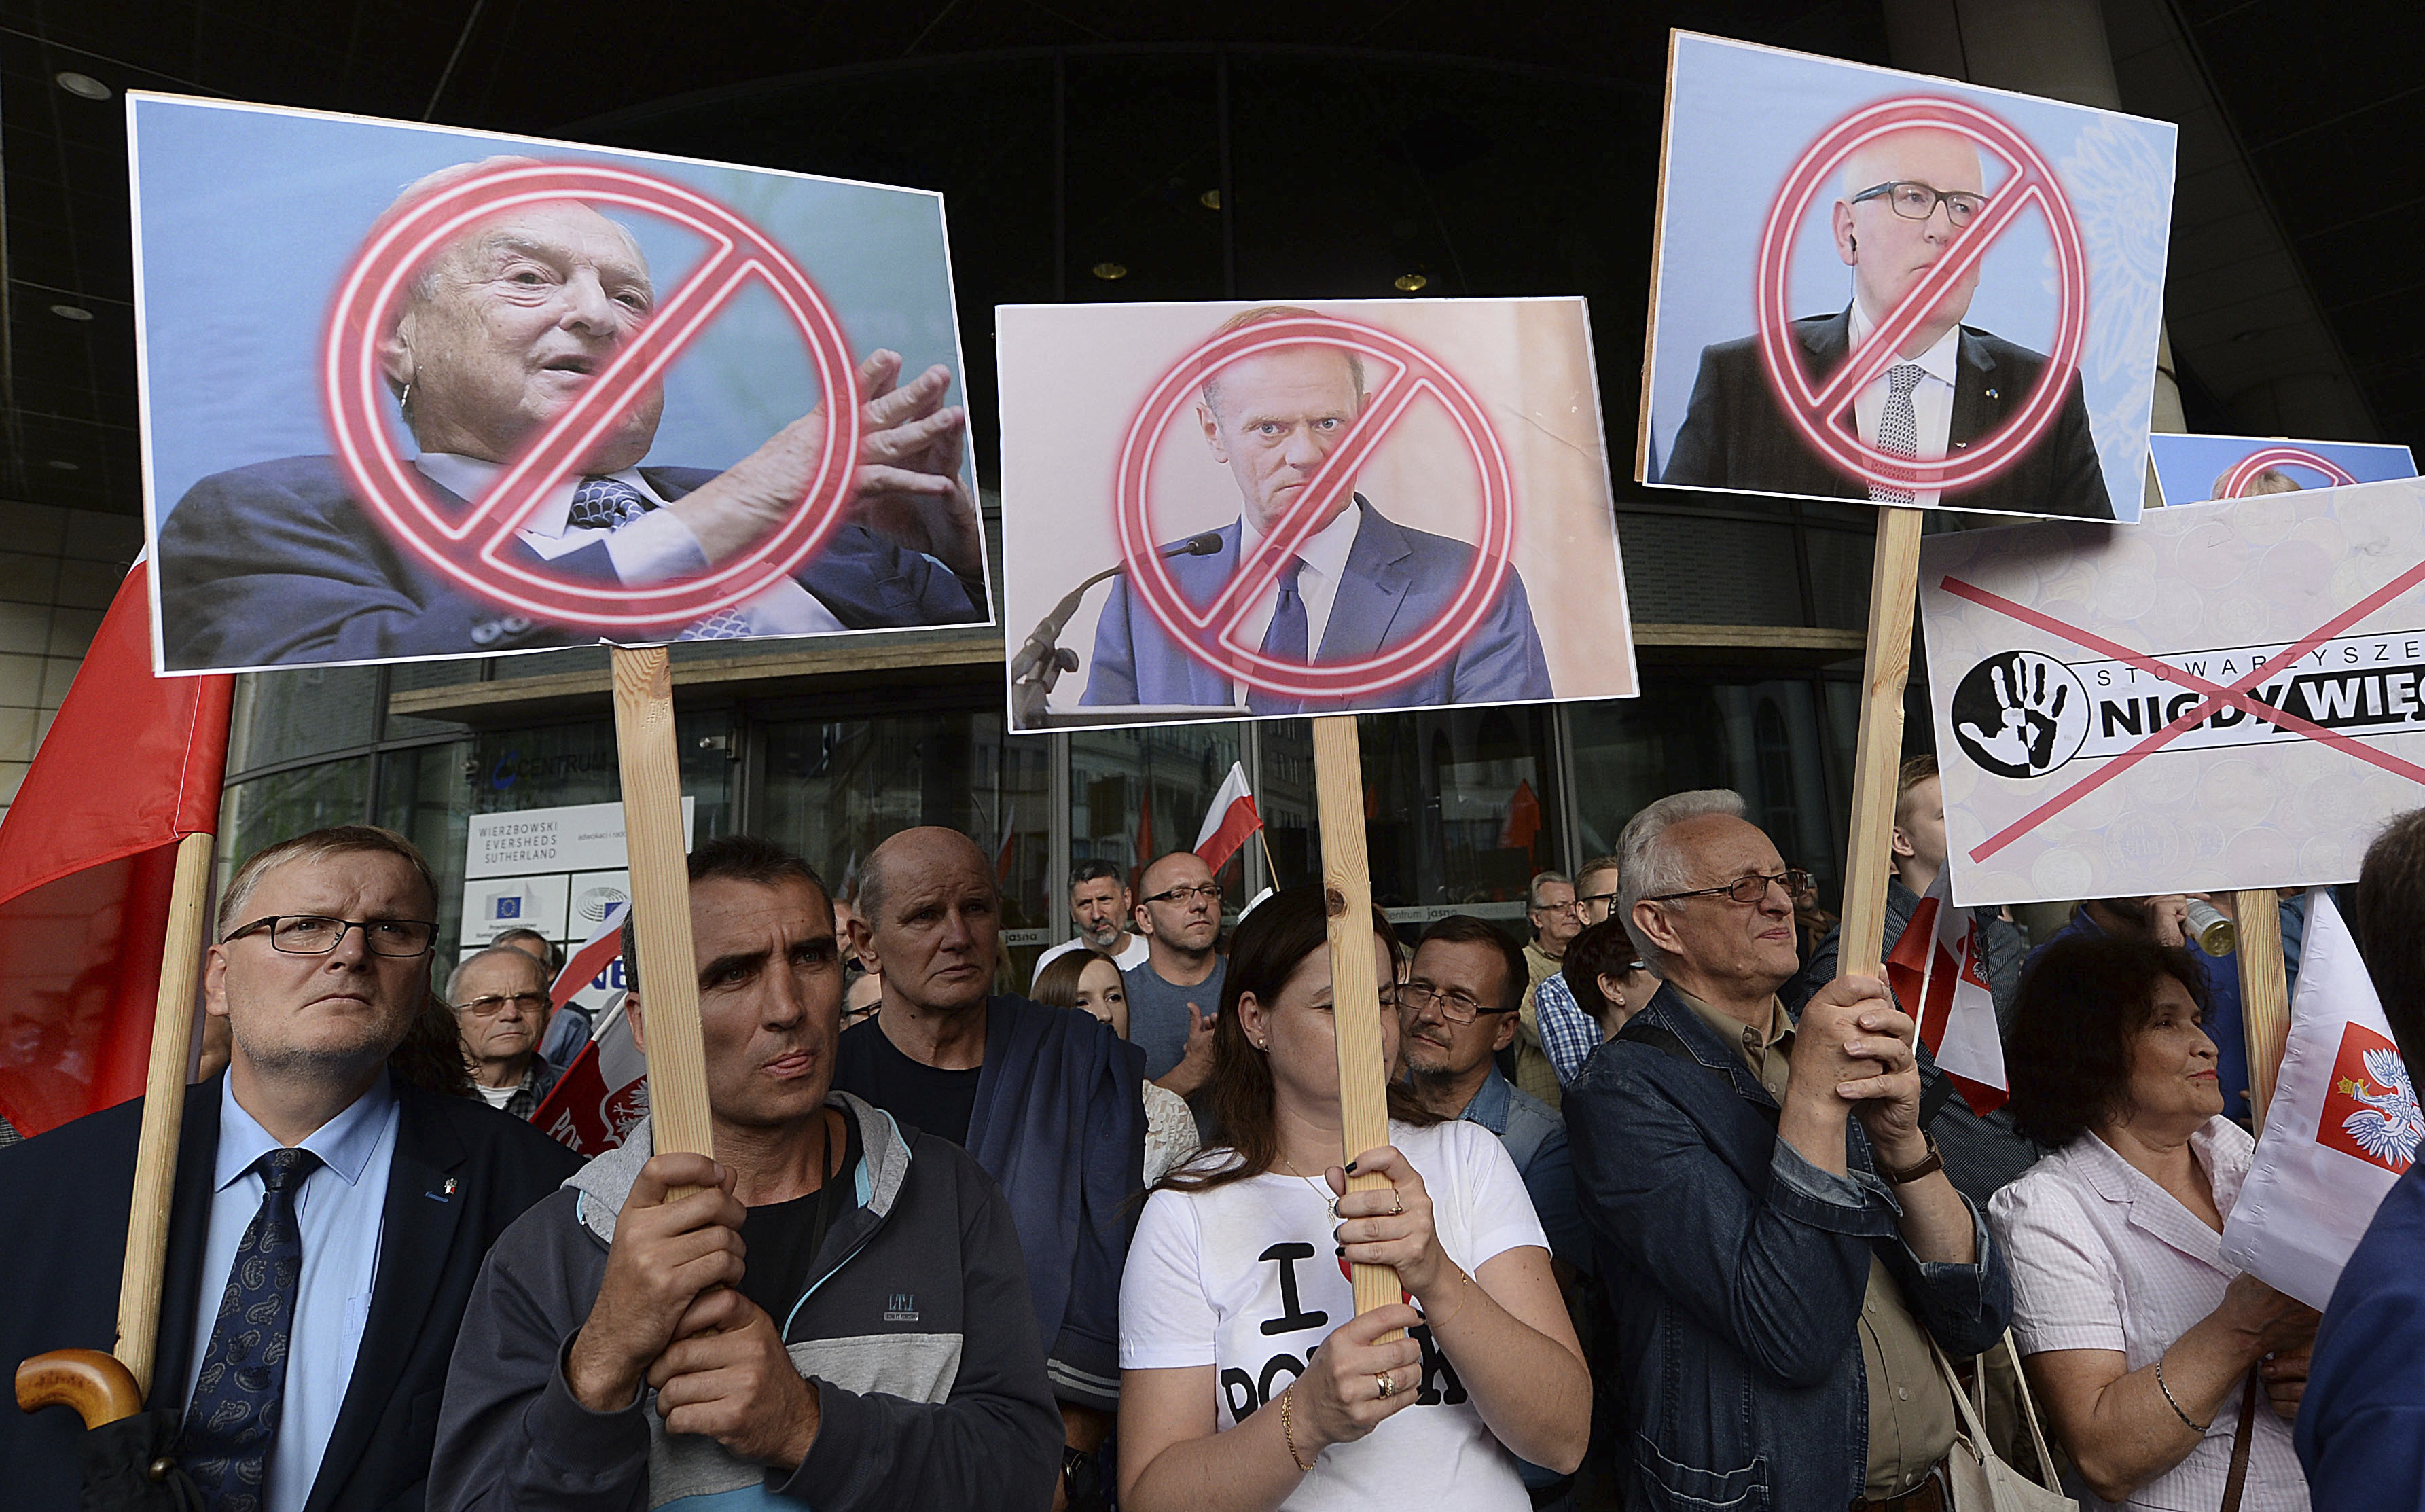   People demonstrate, outside the office of the ruling party leader Jaroslaw Kaczynski, holding banners with the images of from left, financier George Soros ,President of the European Council Donald Tusk and First Vice-President of the European Commission Frans Timmermans, during a protest, in Warsaw, Poland, Wednesday, July 26, 2017